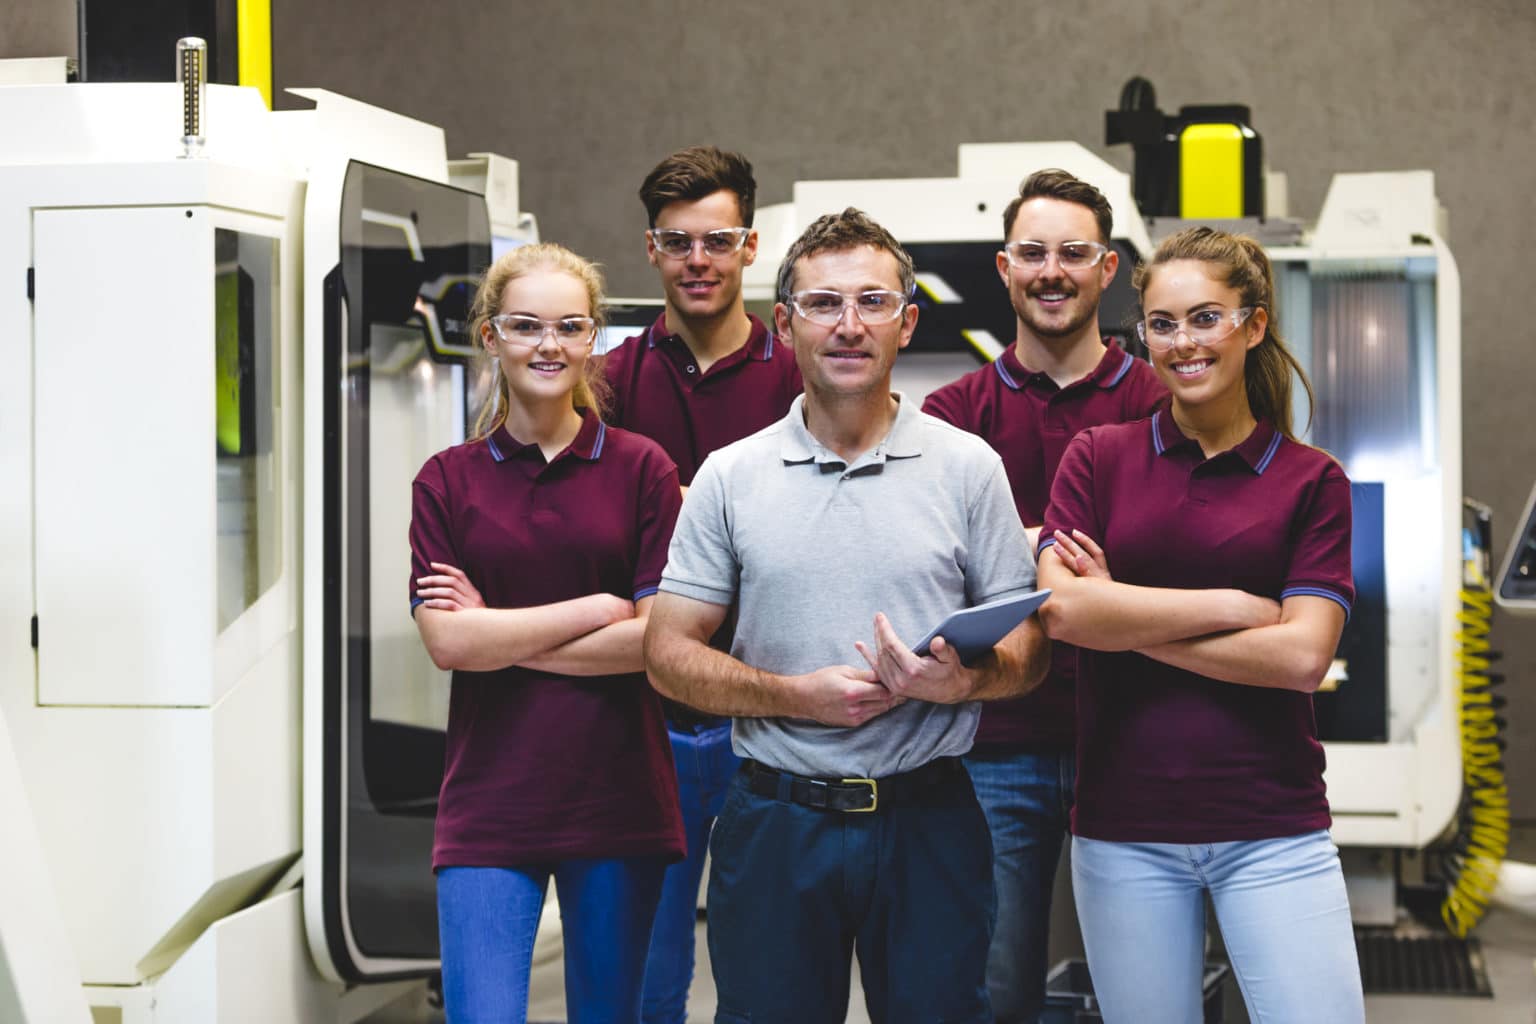 A group of manufacturing apprentices and their trainer smiling